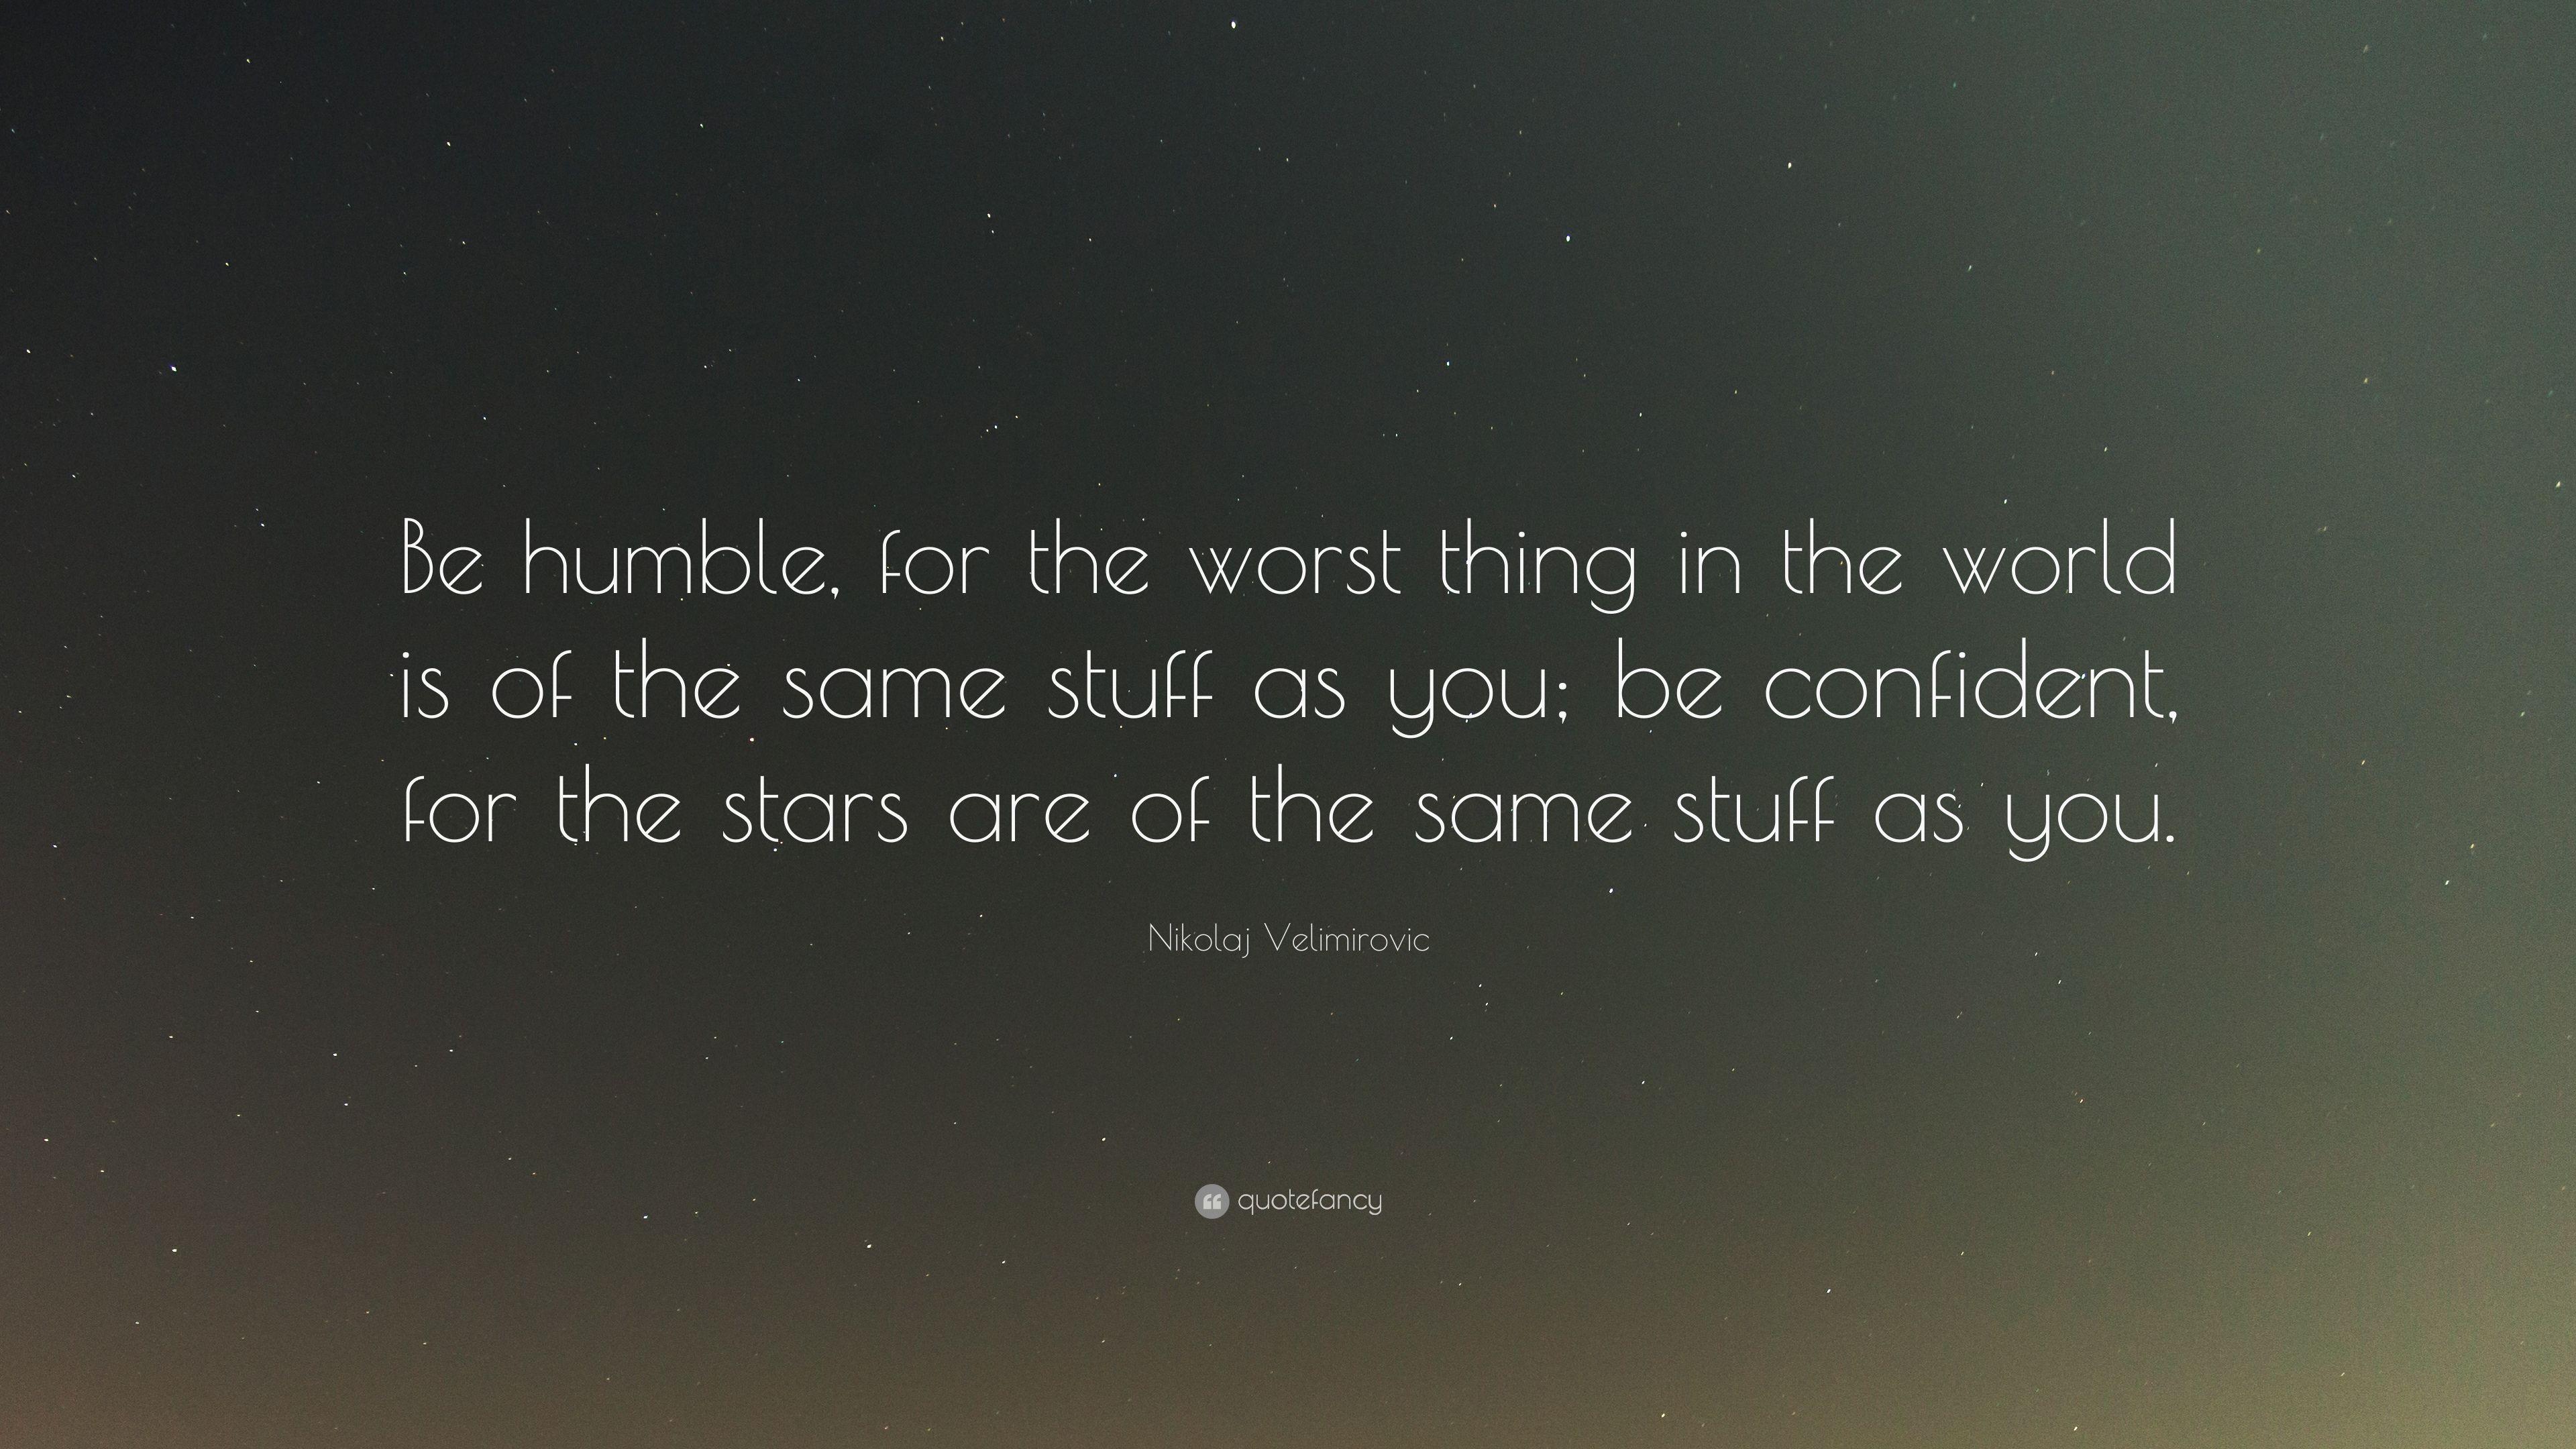 Nikolaj Velimirovic Quote: “Be humble, for the worst thing in